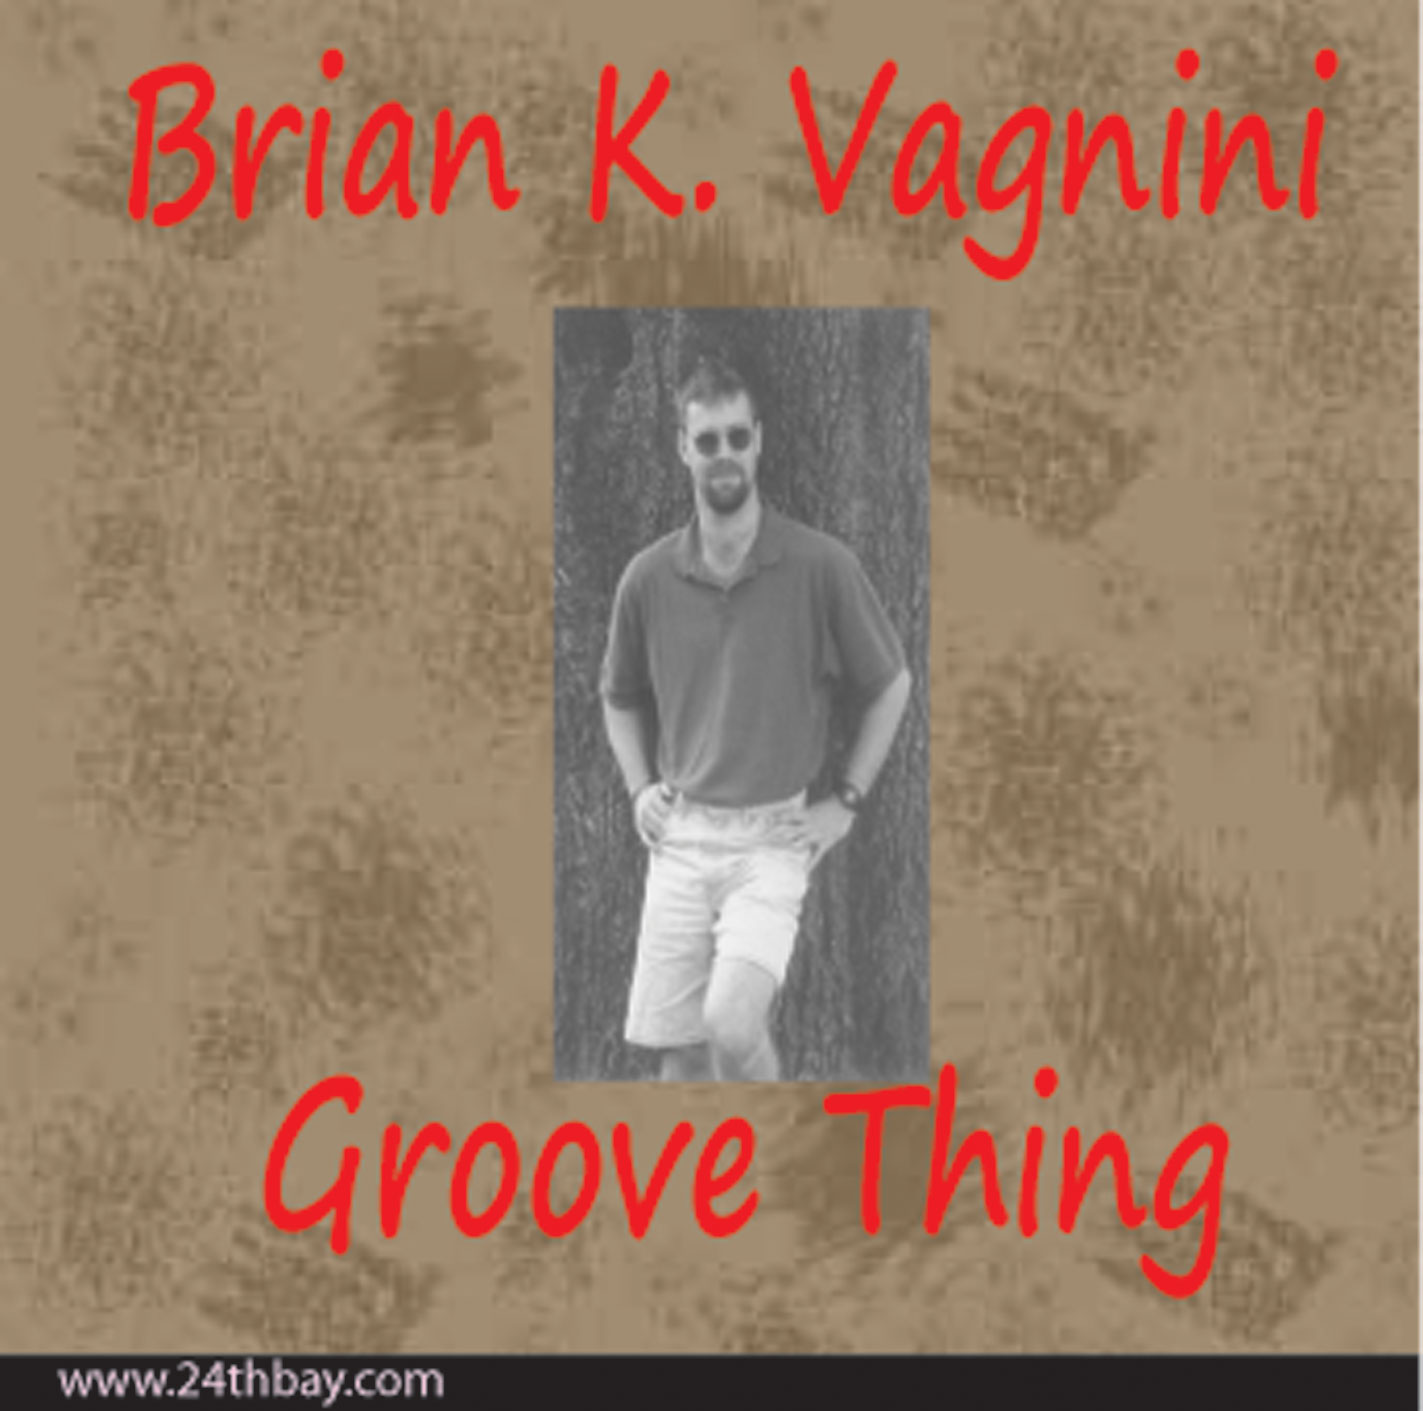 Groove Thing by Brian K. Vagnini